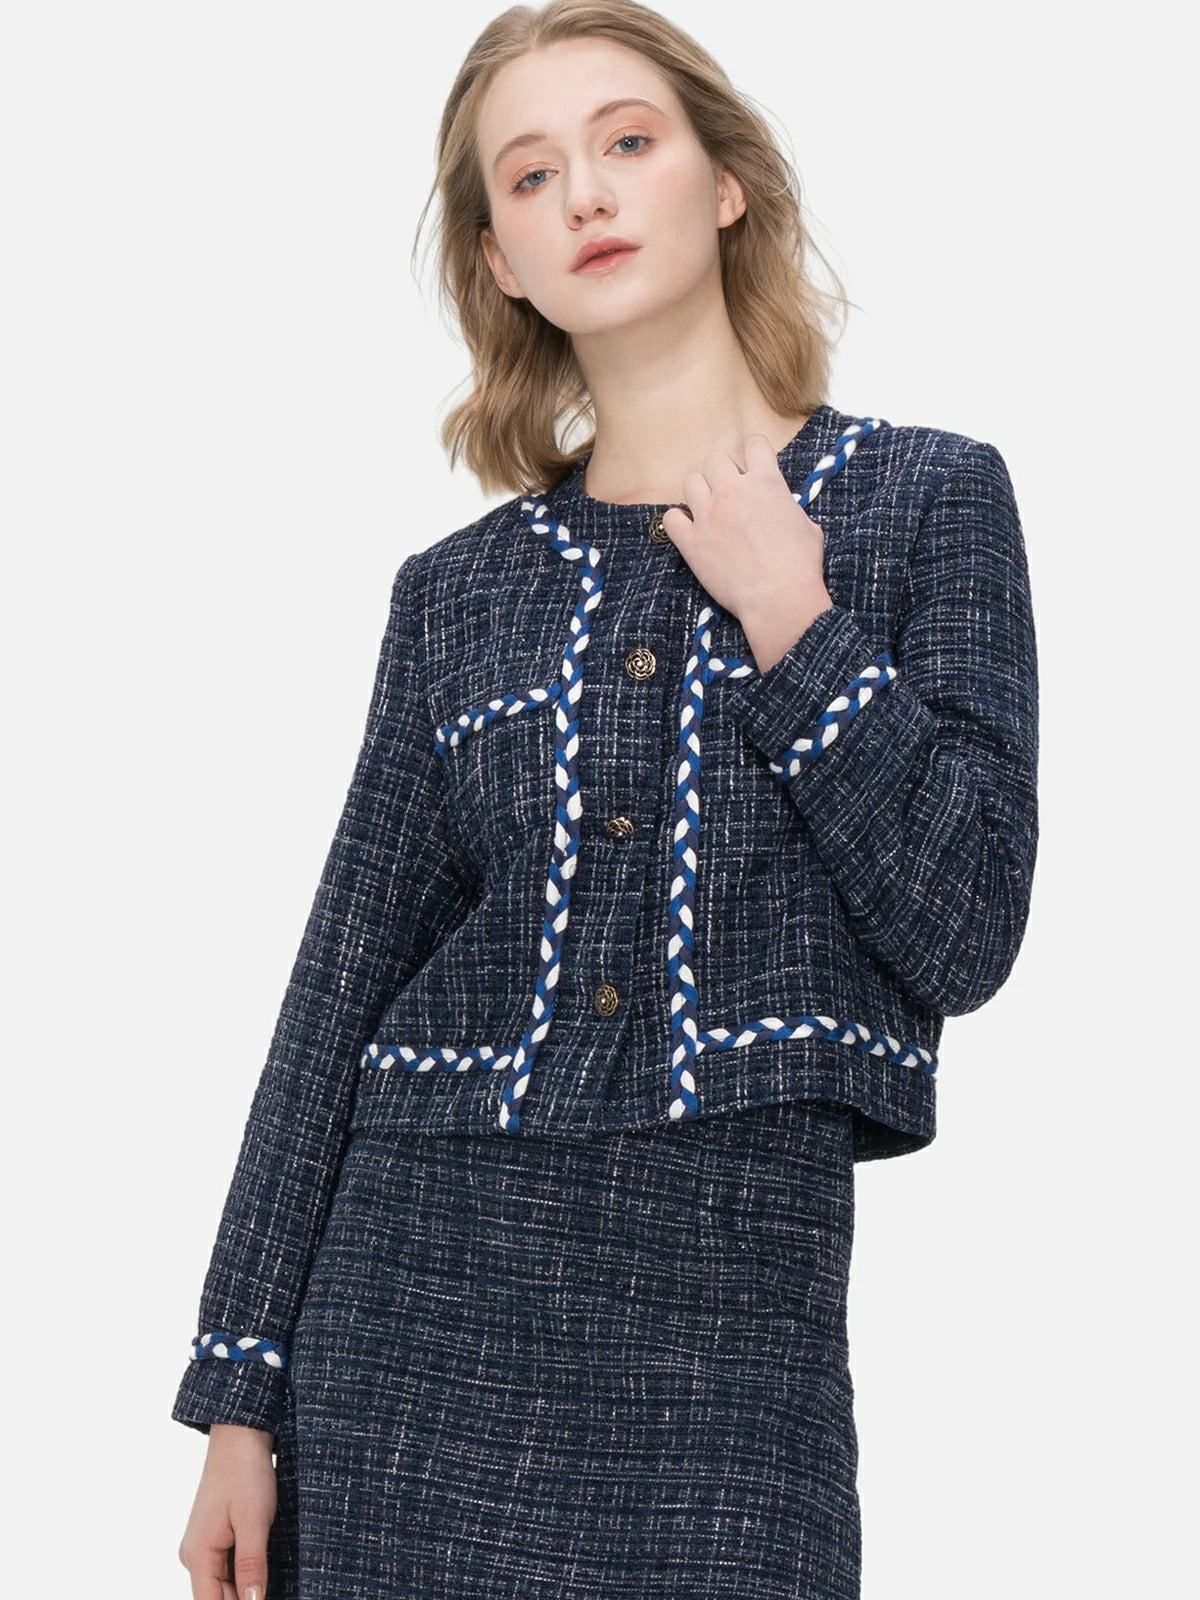 Make a fashion statement with this versatile and sophisticated navy blue plaid jacket, designed with camellia-shaped buttons and a tailored silhouette.